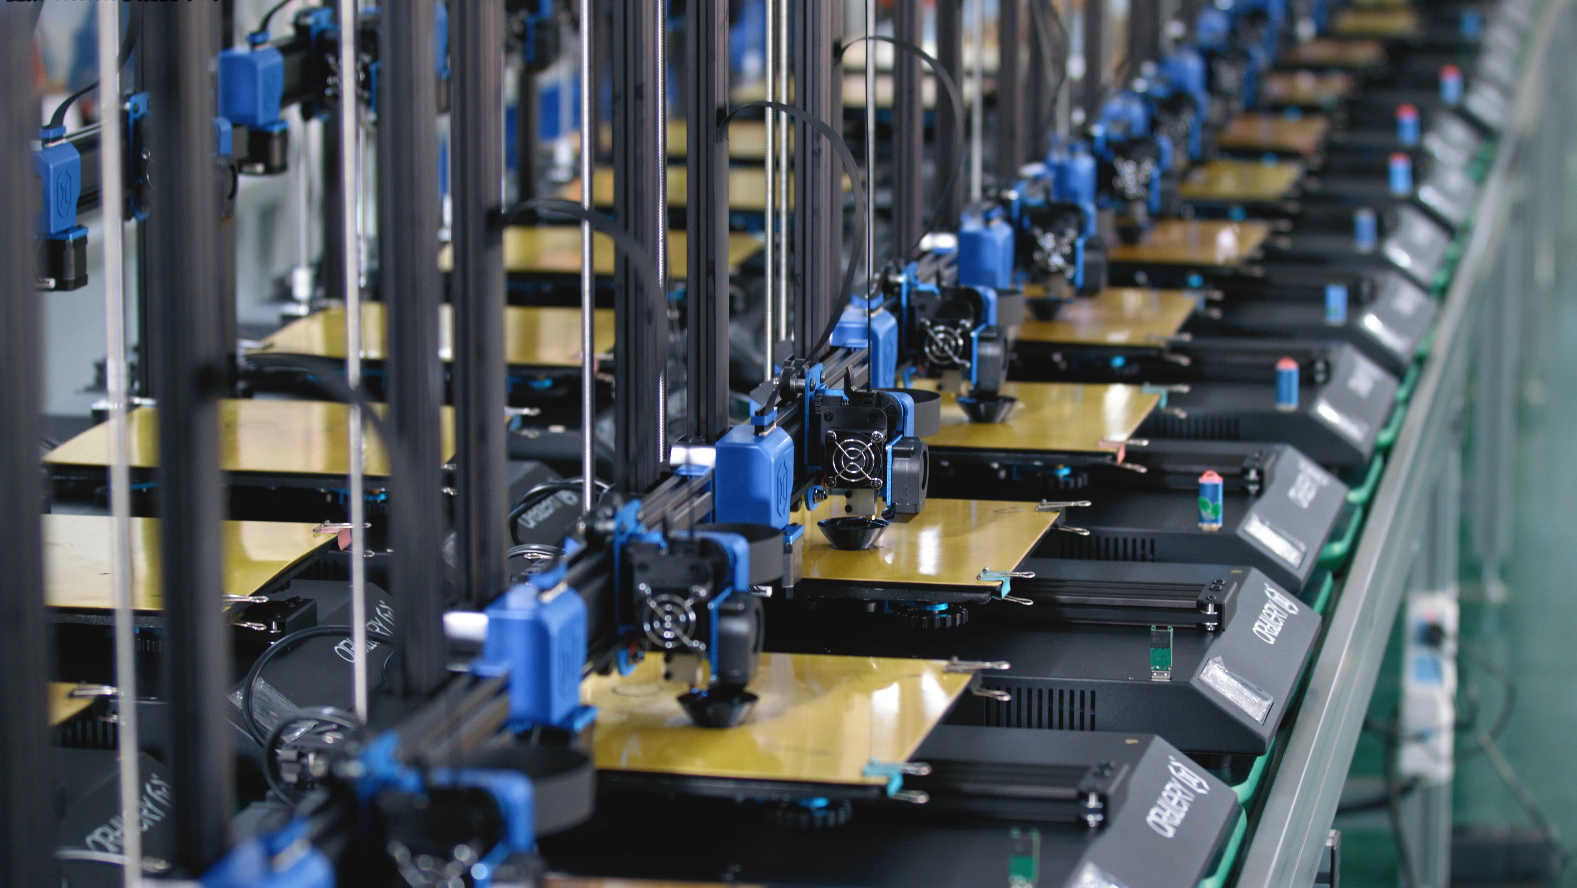 Find out how to Produce Excessive-High quality 3D Printers – 3DPrint.com